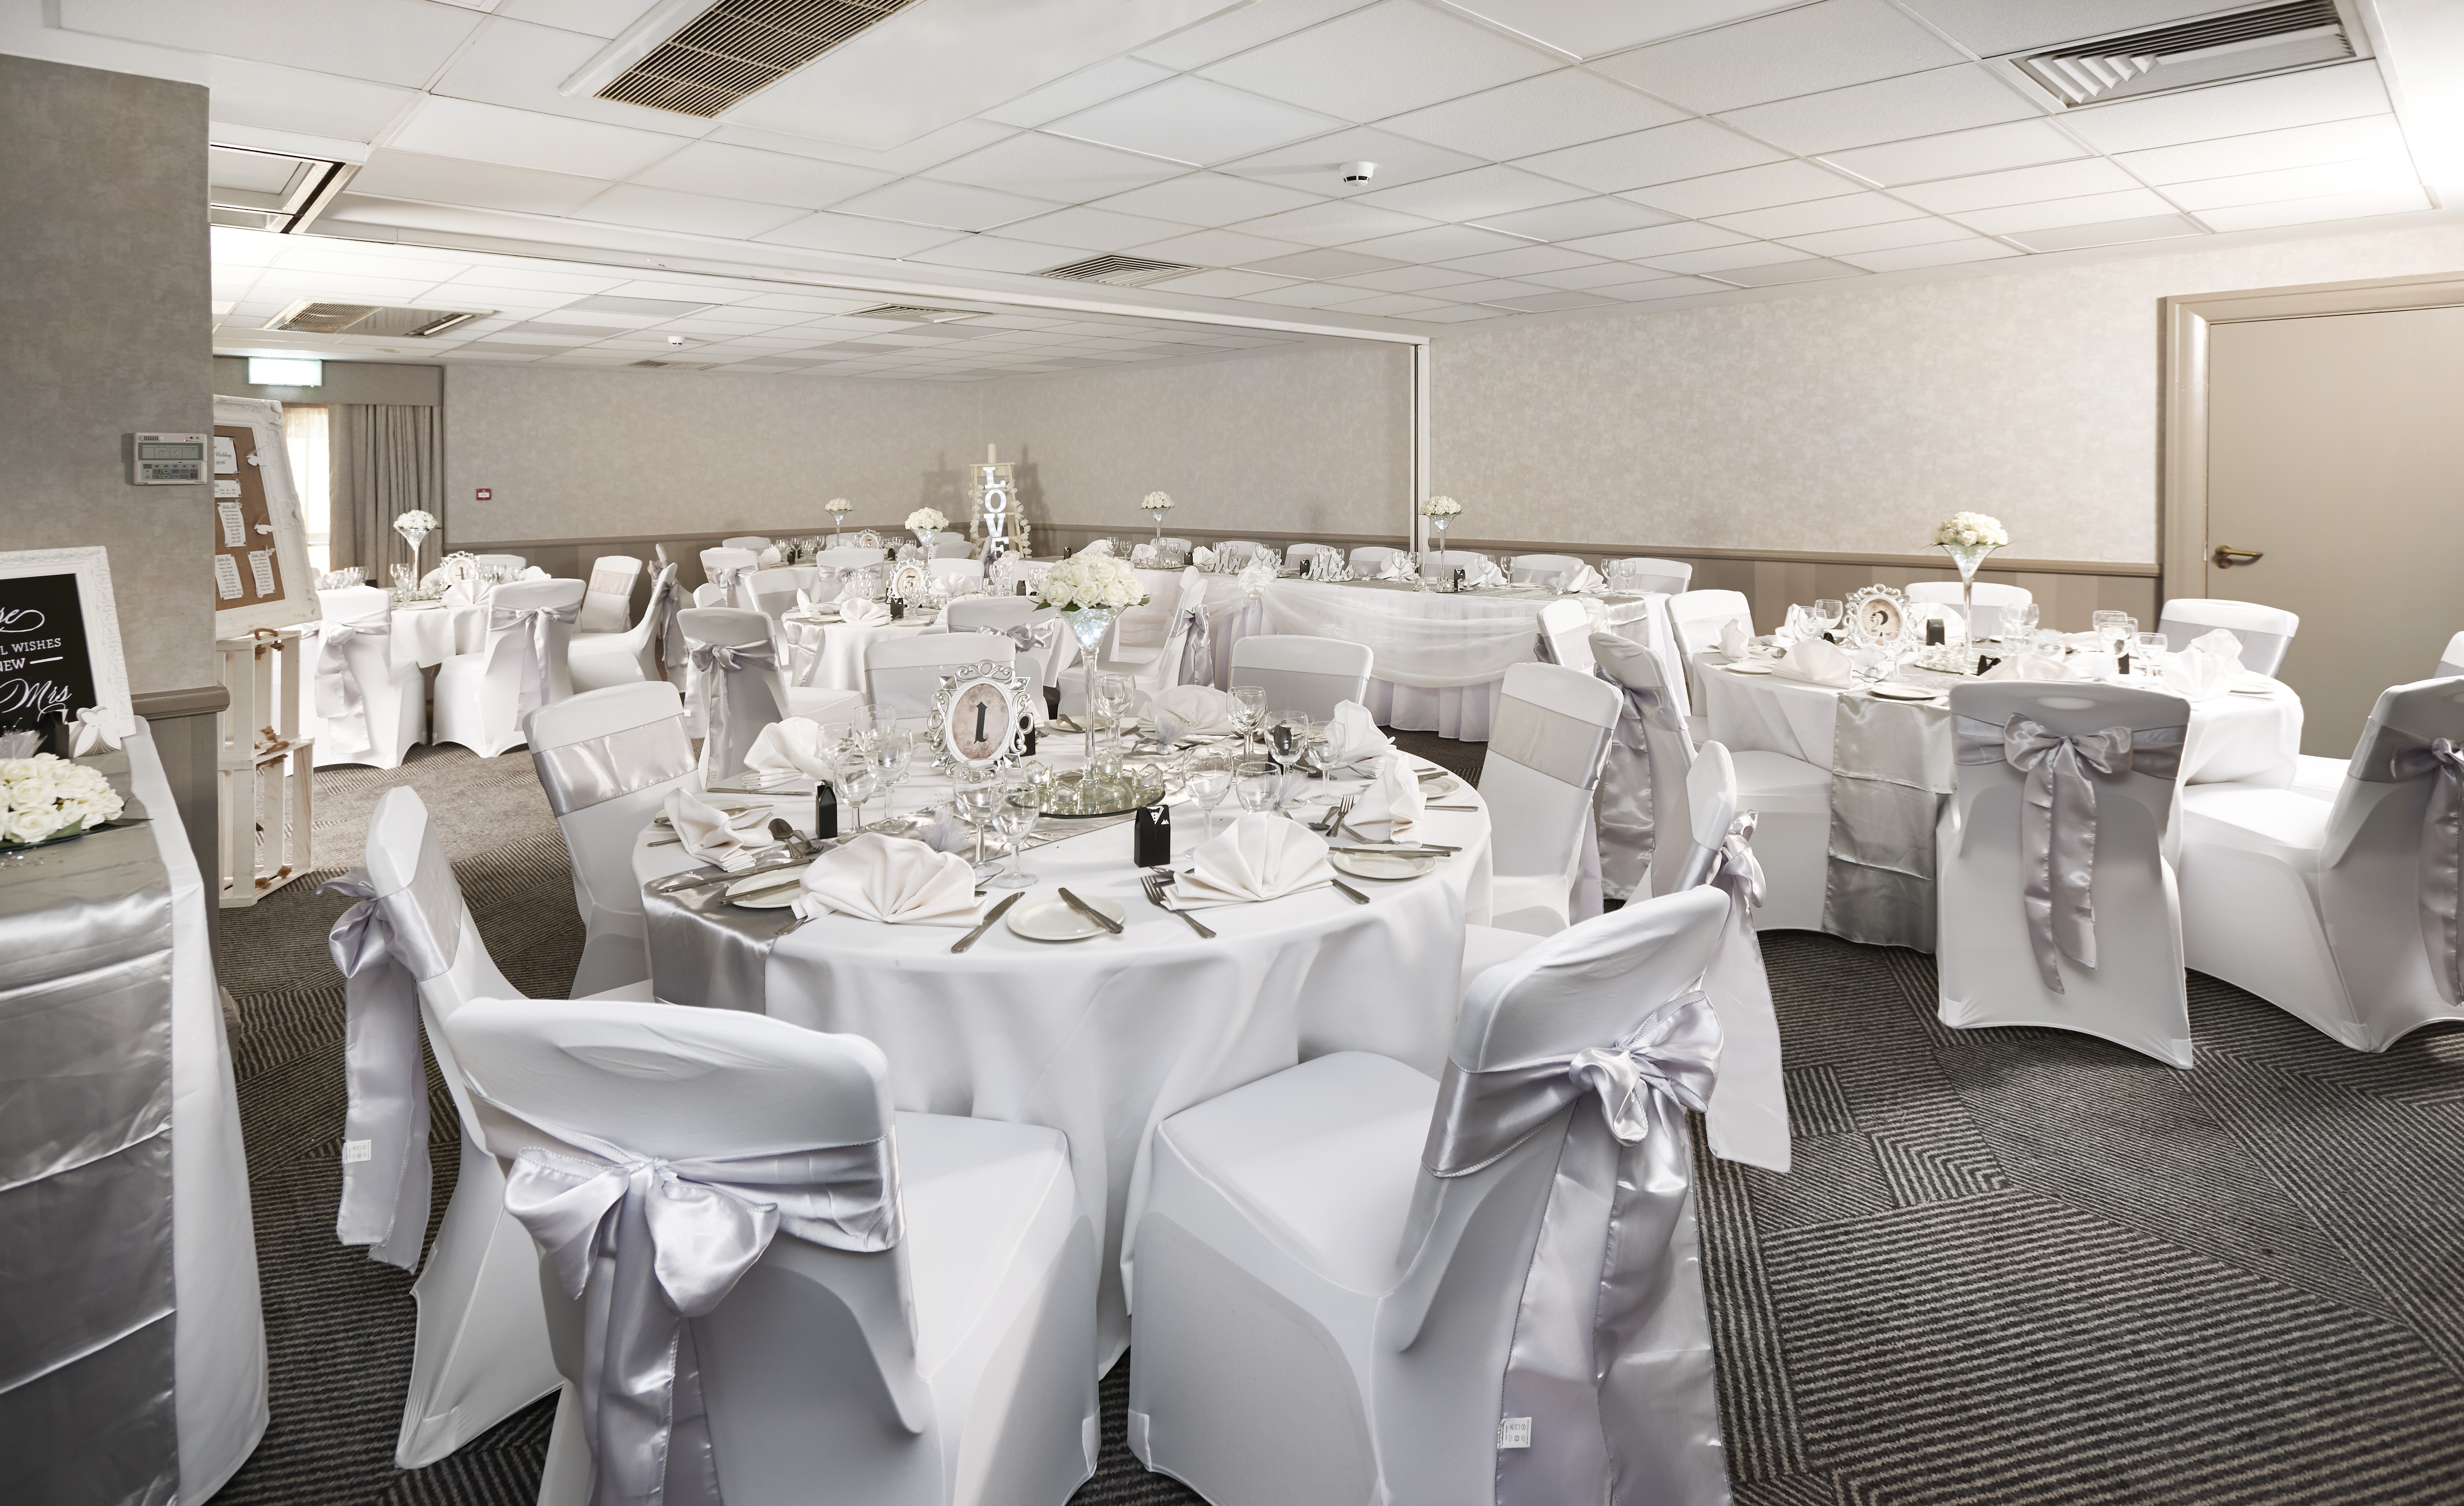 Place Settings, Wine Glasses, Photo Frame and Napkins on Round Tables With White Linens Decorated for Wedding Reception in Oxford Suite